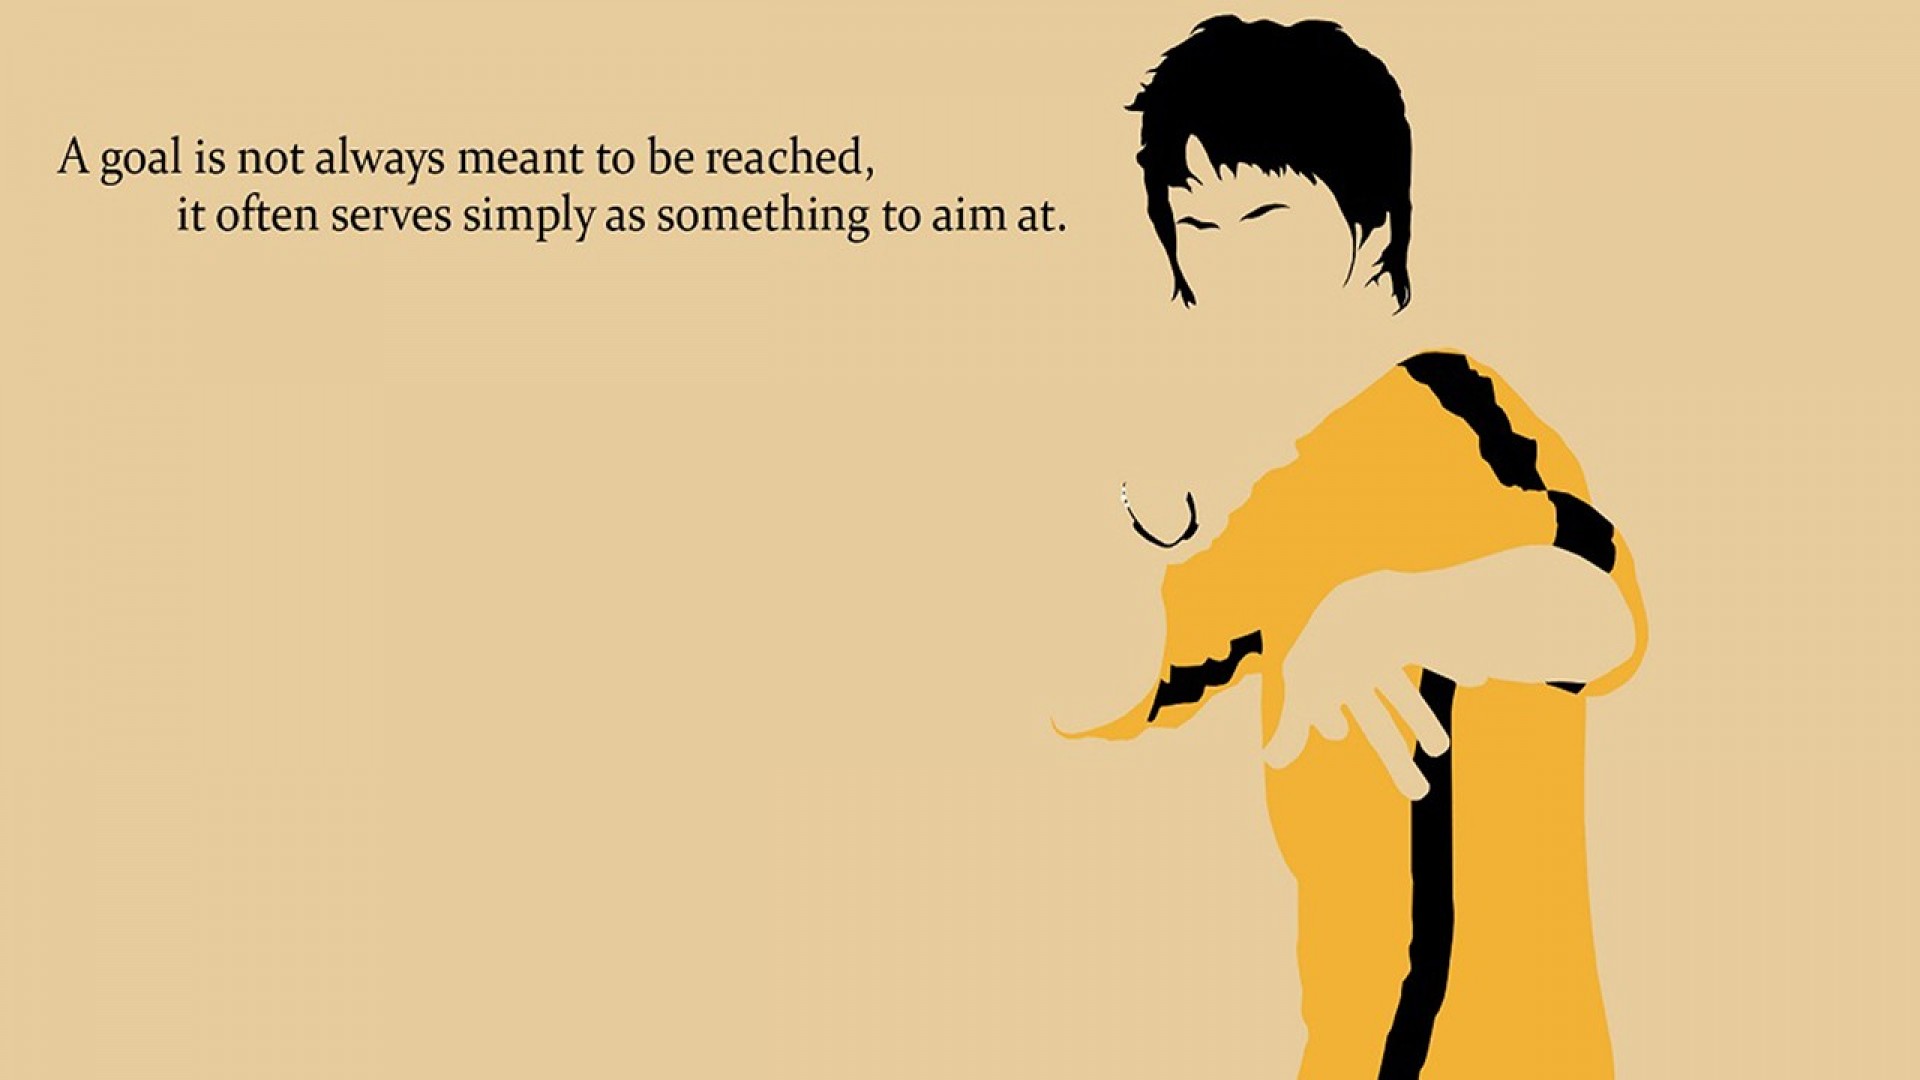 Bruce Lee Wallpapers HD quotes